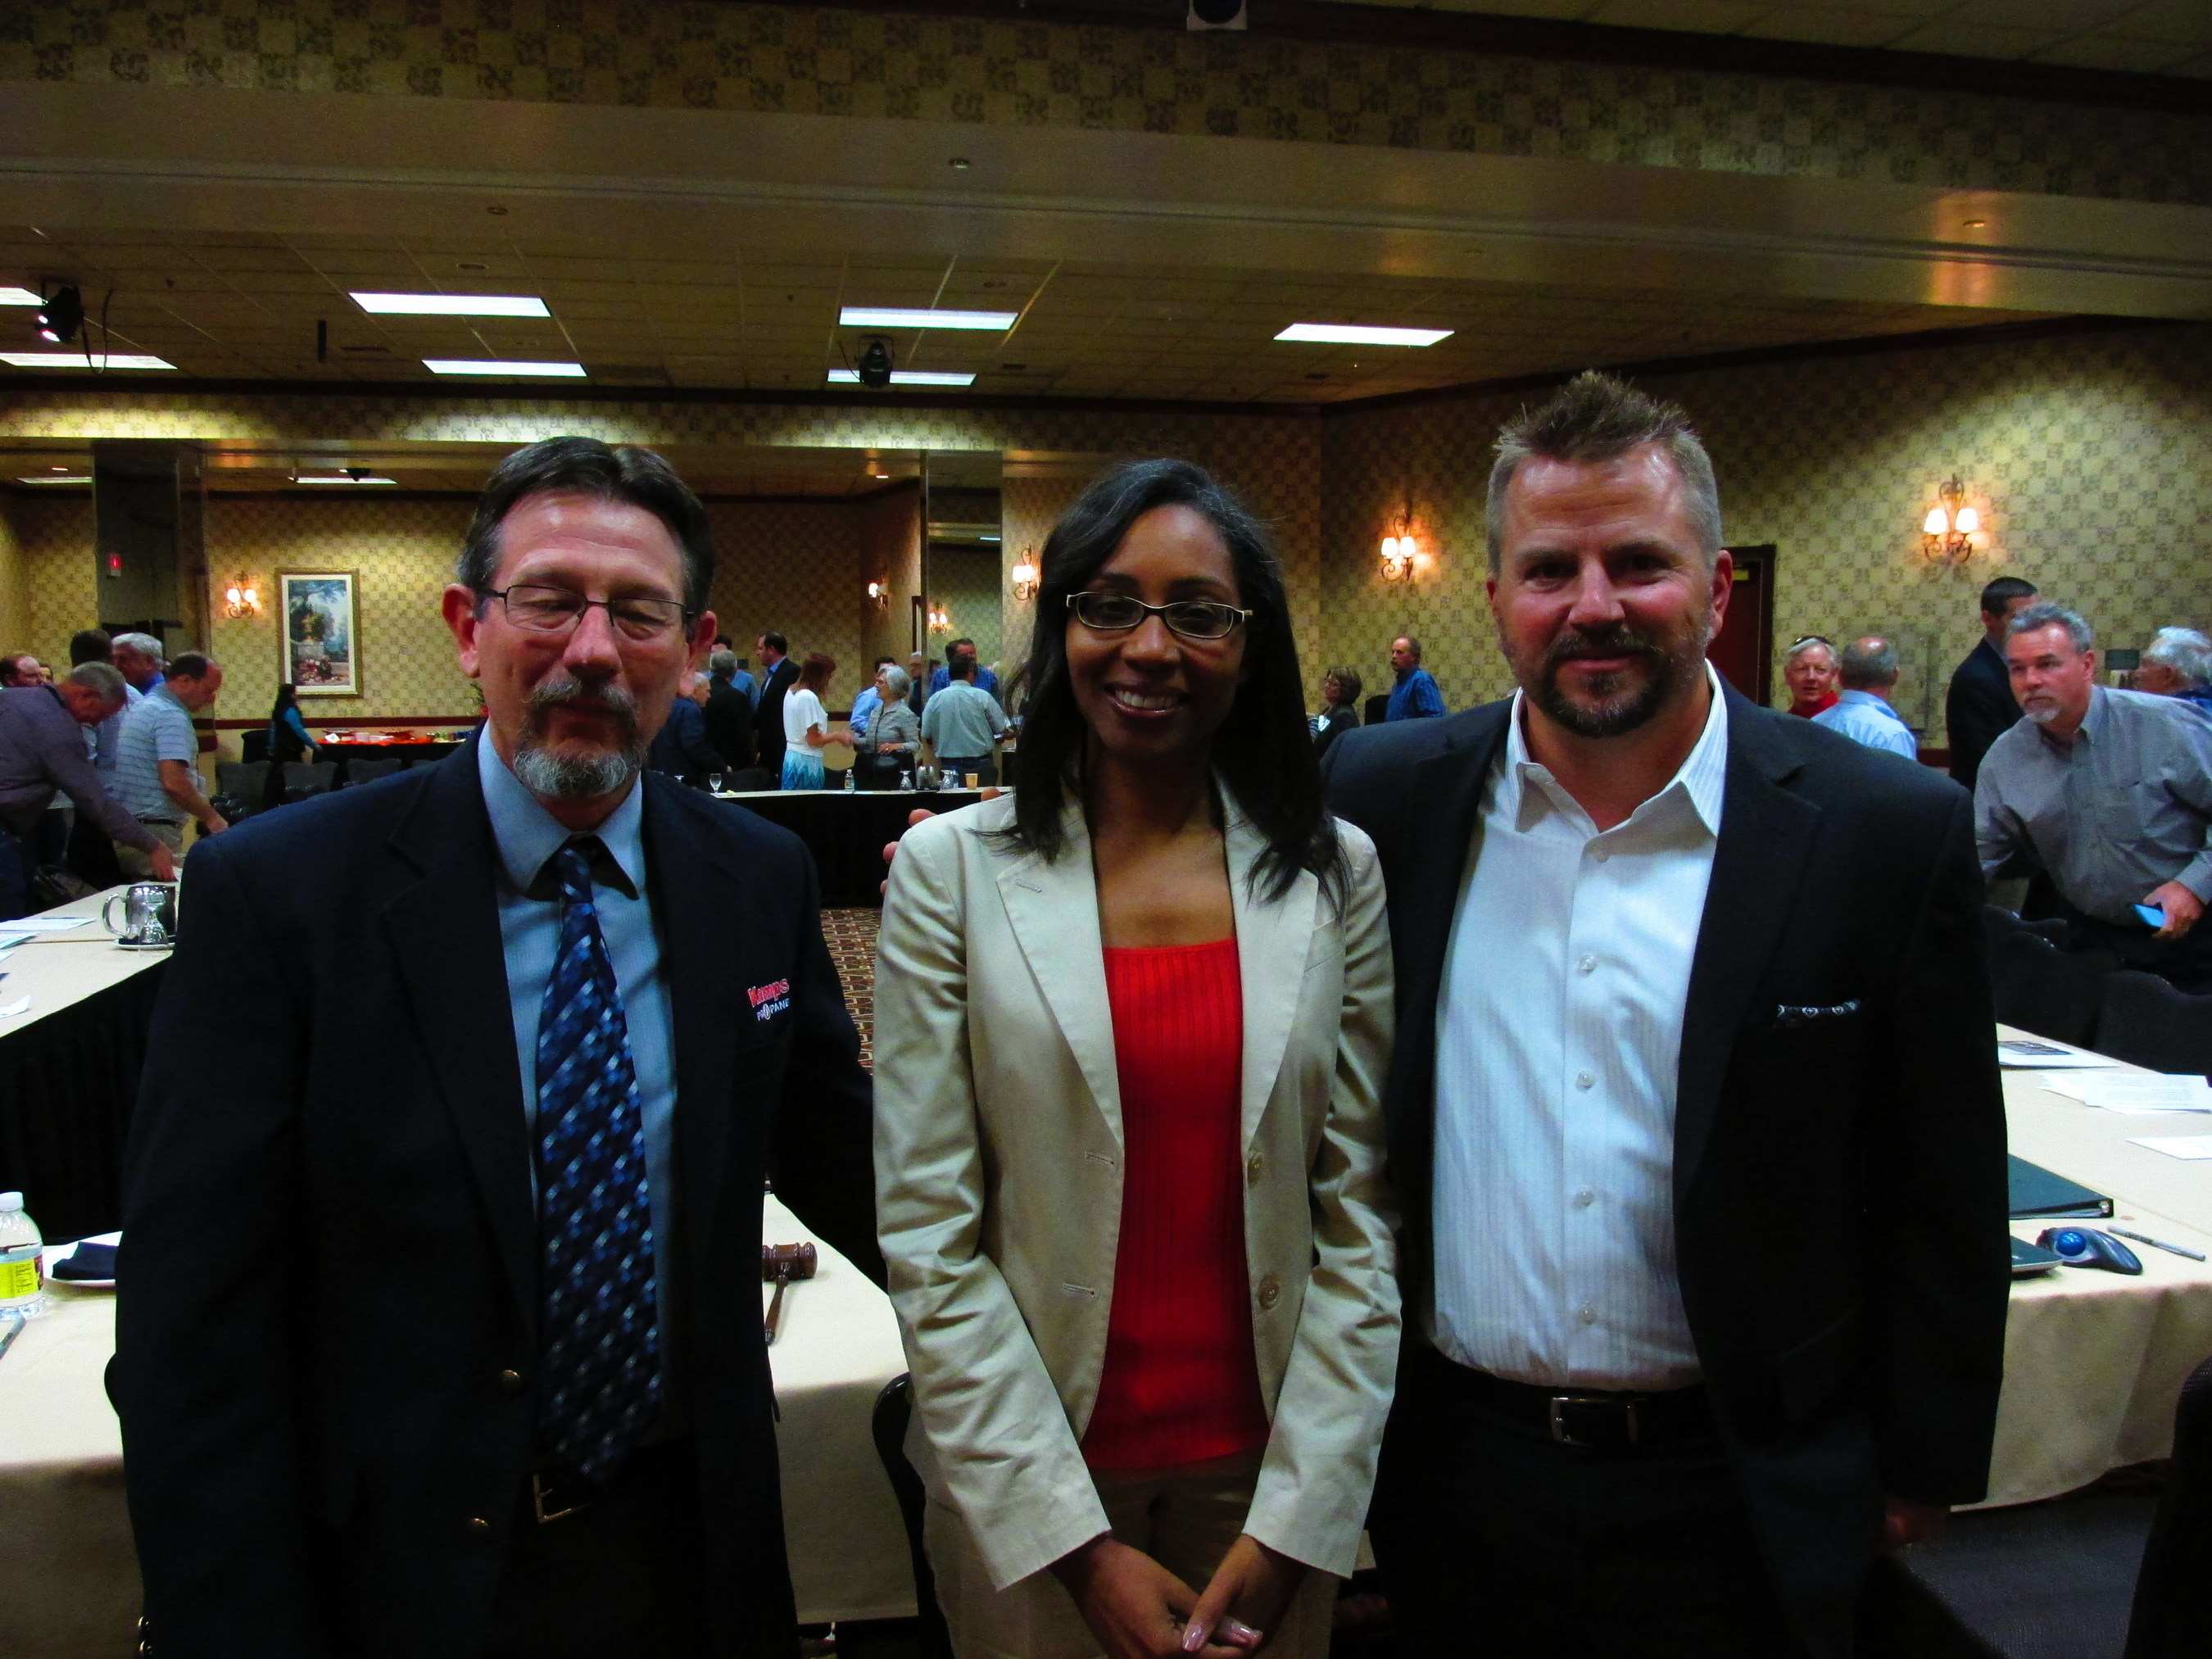 2015-2016 Western Propane Gas Association President Terry Ayres (right), WPGA Executive Director Joy Alafia and Outgoing WPGA Board President Bruce Thompson at the WPGA Board Meeting in Reno, NV.